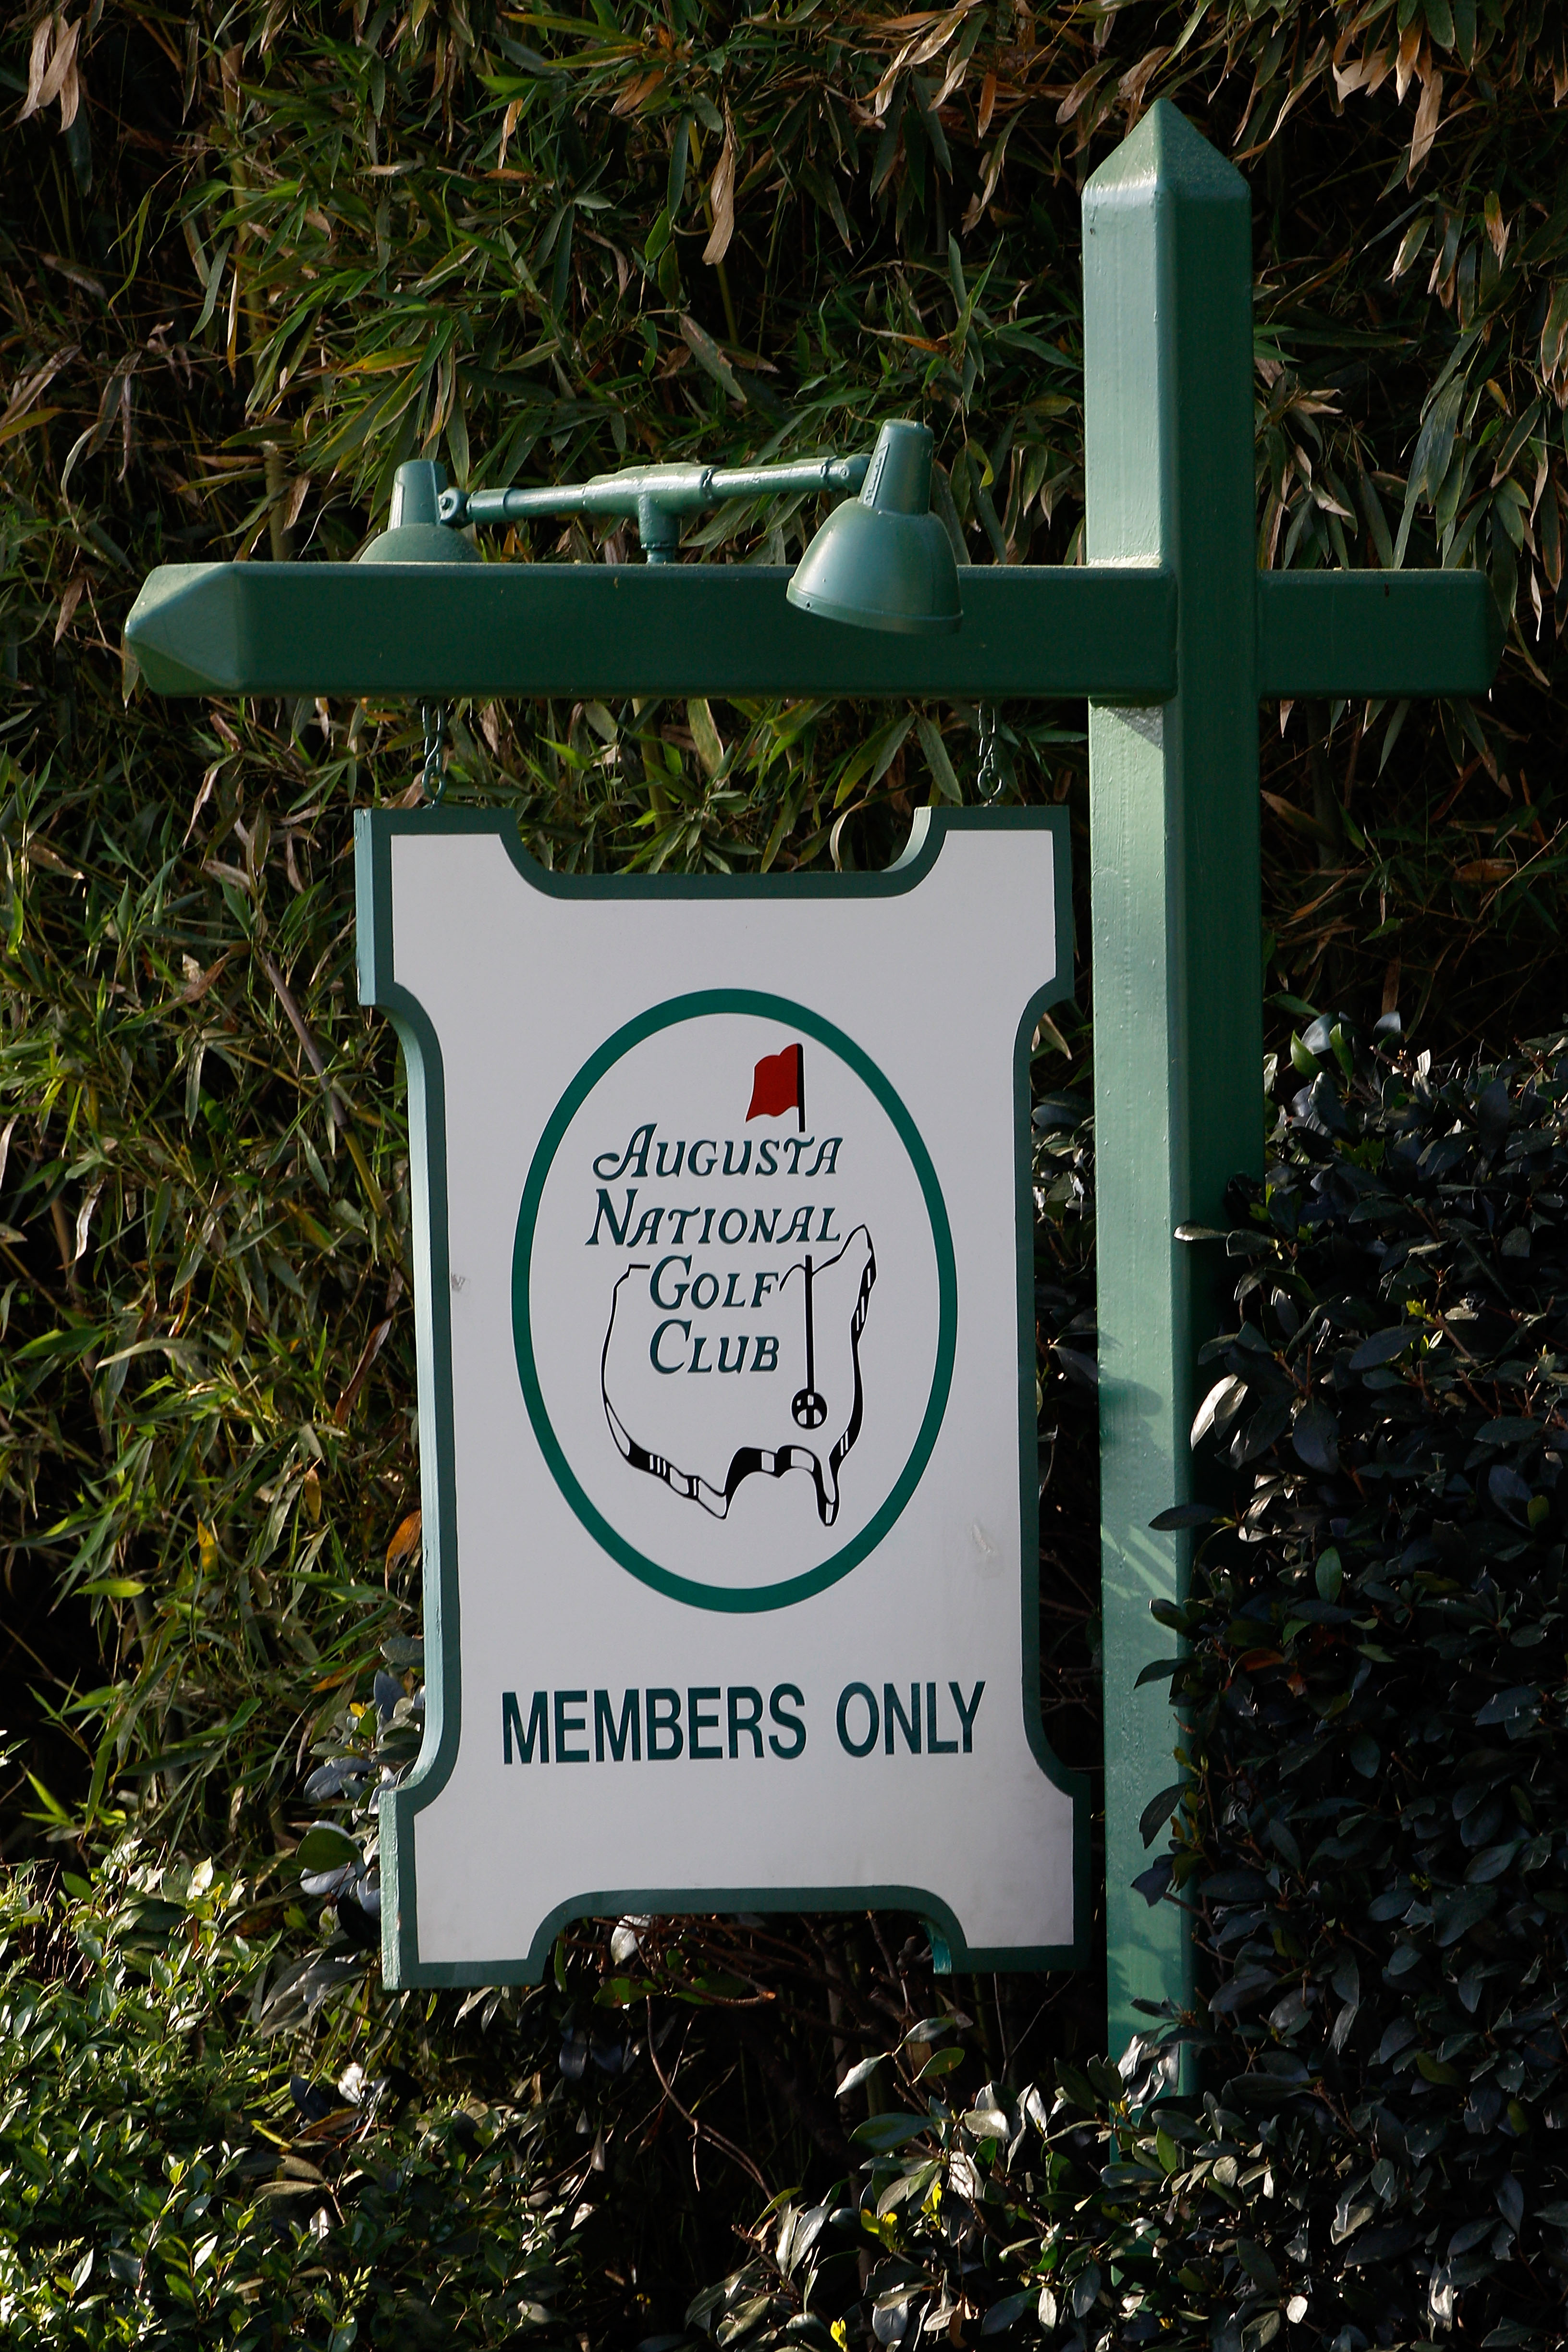 AUGUSTA, GA - APRIL 04:  A 'members only' sign is seen on Magnolia Lane along Washington Road in front of Augusta National Golf Club before the Masters on April 4, 2010 in Augusta, Georgia.  (Photo by Scott Halleran/Getty Images)